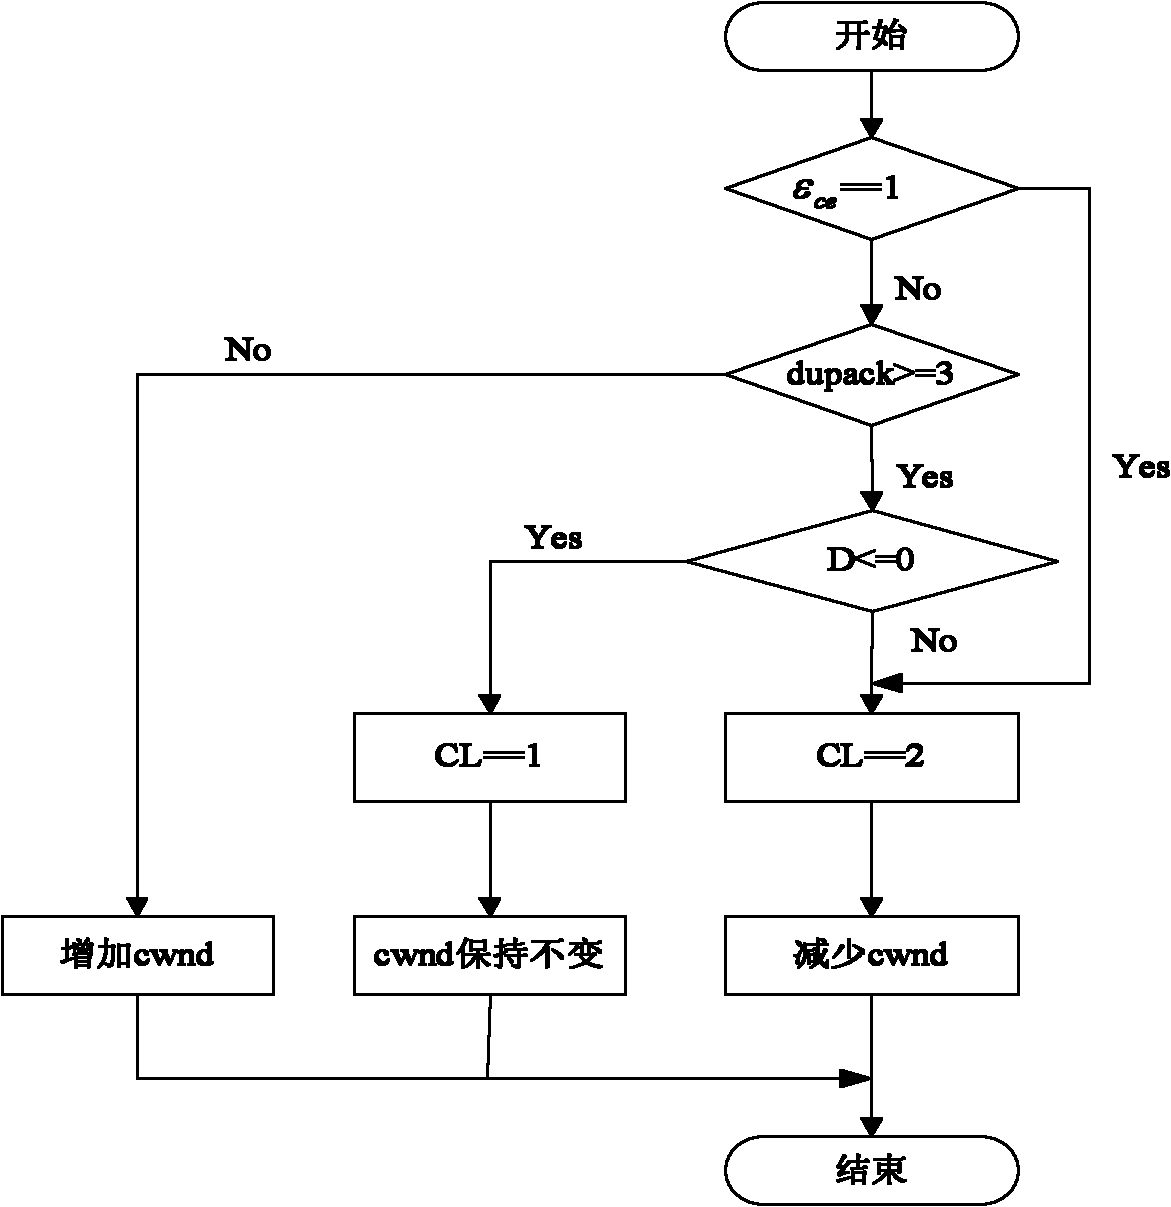 Method for controlling congestion control method by fusing three kinds of information in wired/wireless hybrid network